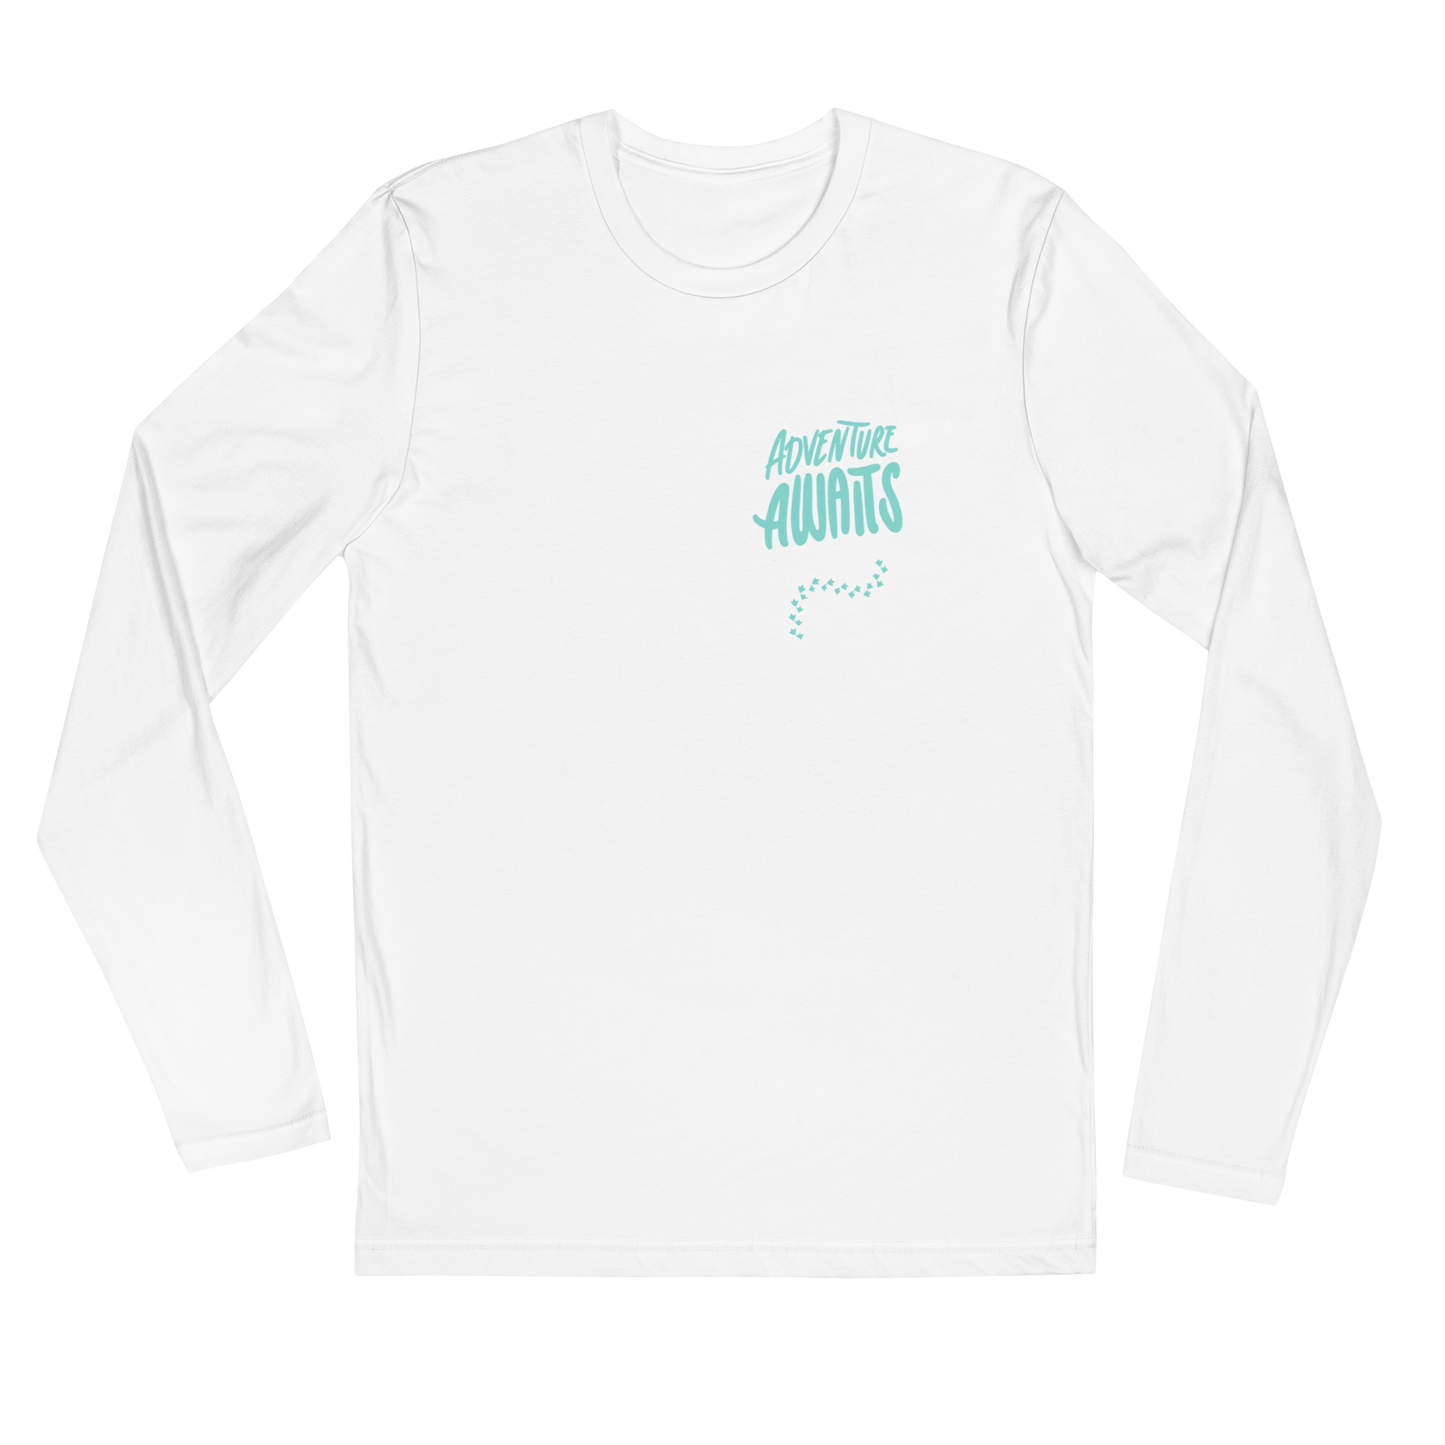 "Adventure Awaits" - Men's Long Sleeve Fitted Crew Top